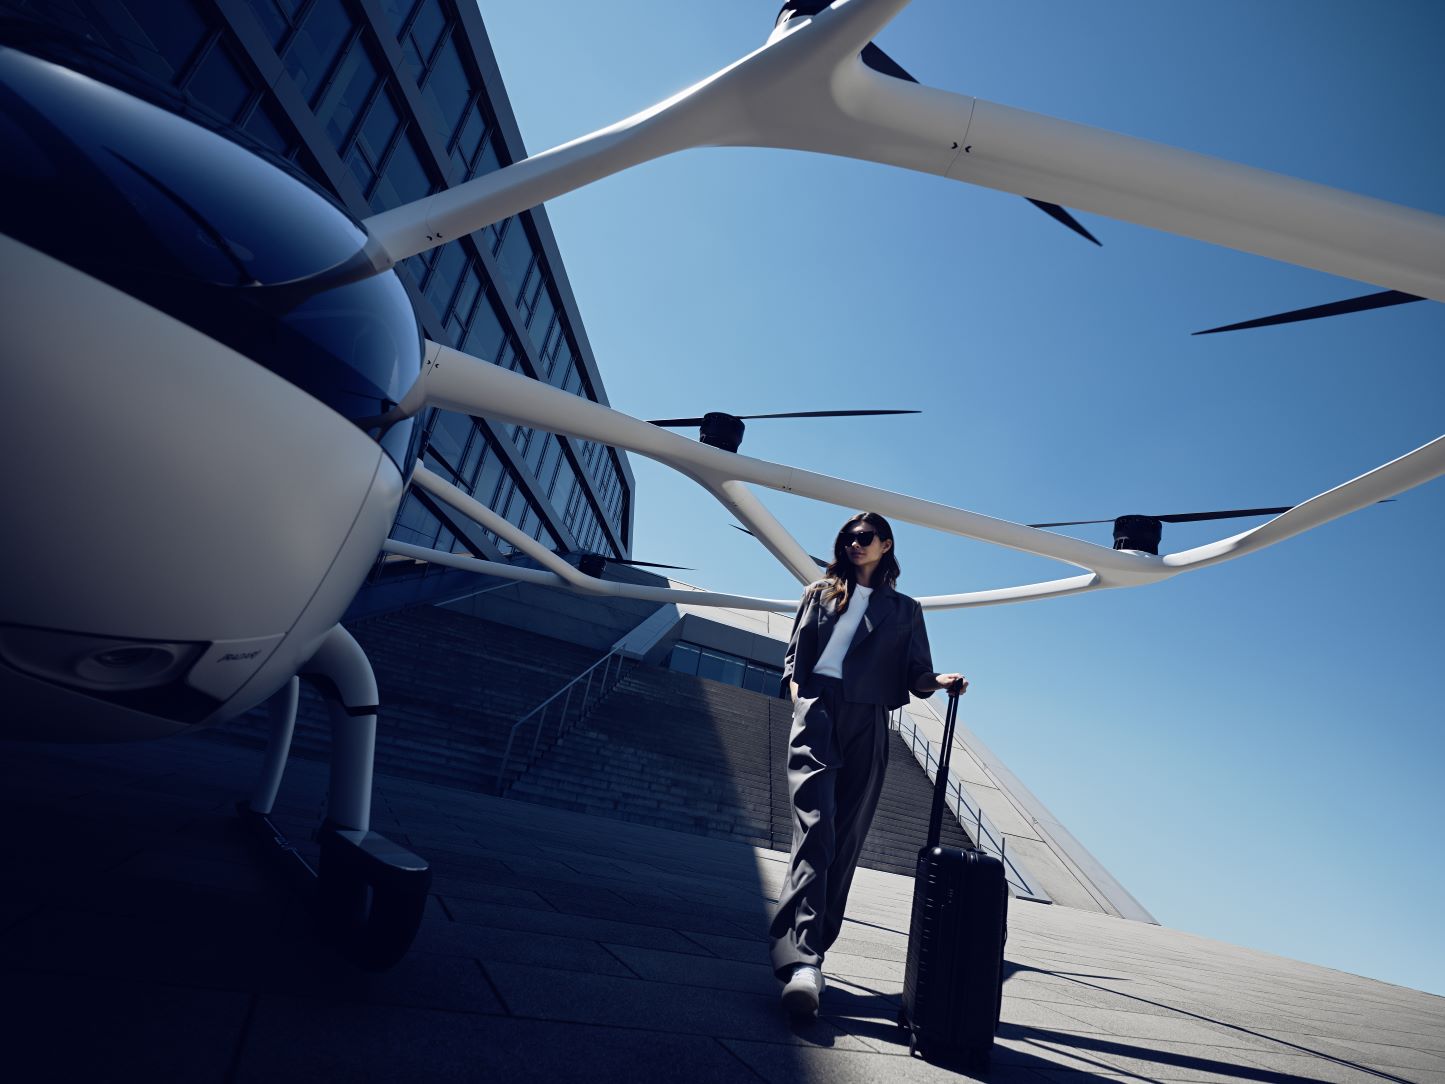 Volocopter's VoloCity Air Taxi for Commercial UAM Services